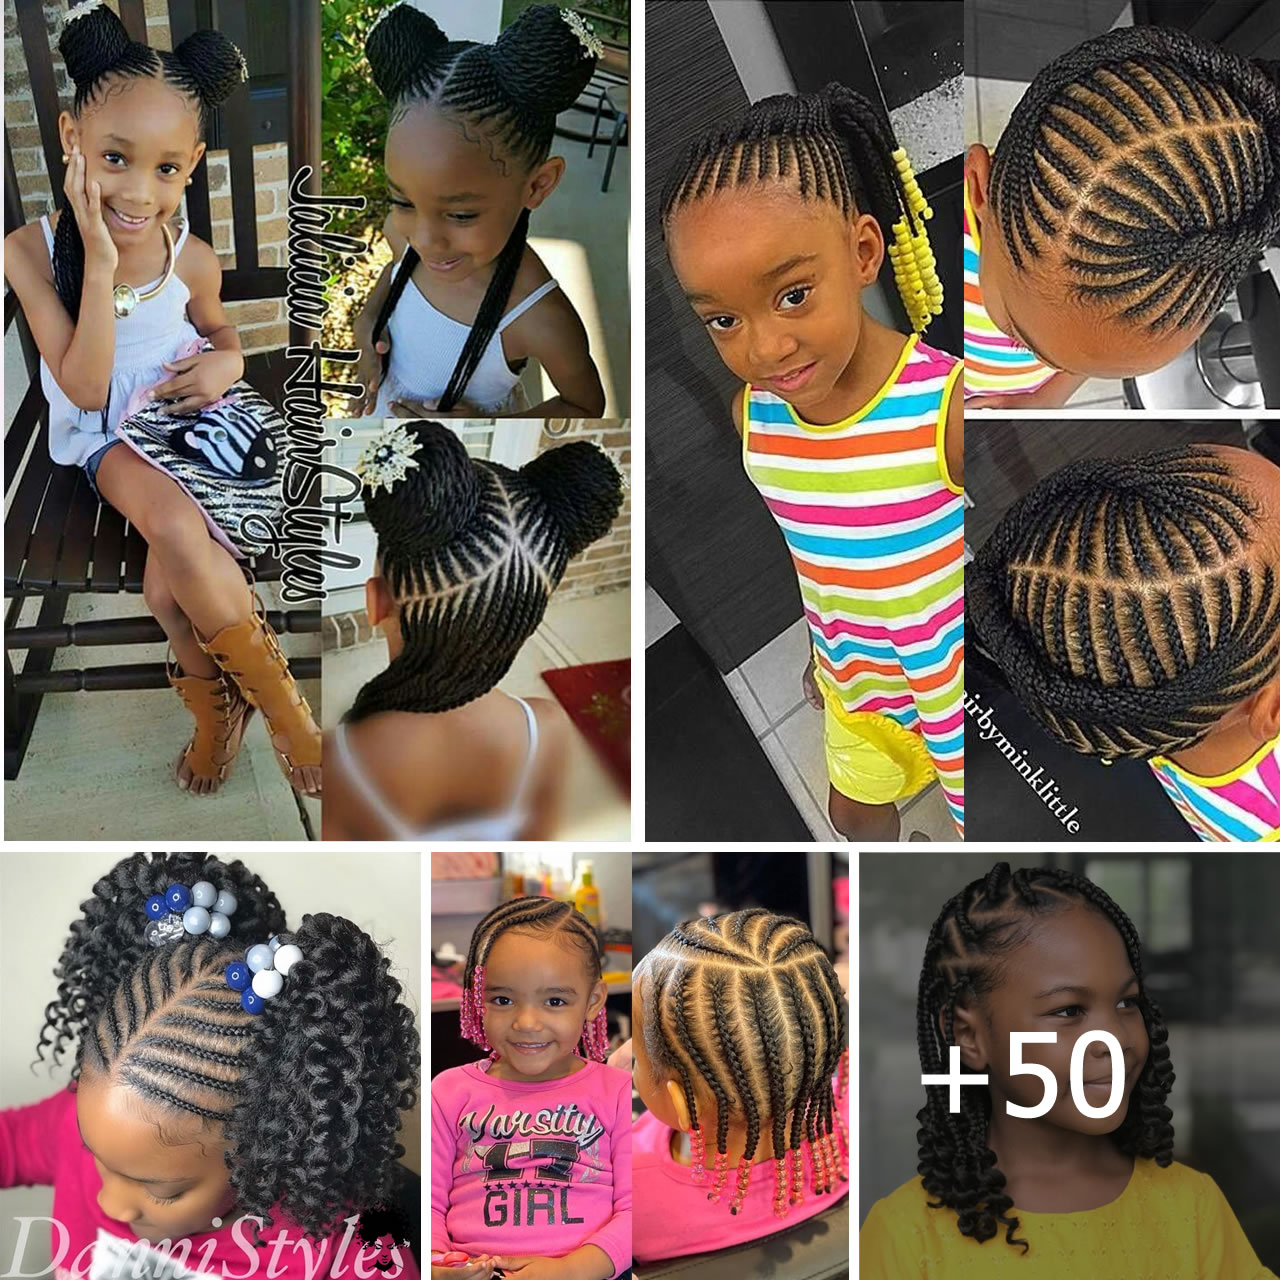 Now-Create-Your-Daughters-Hair-Style-With-Half-Buns-2-1.jpg (1280Ã—1280)